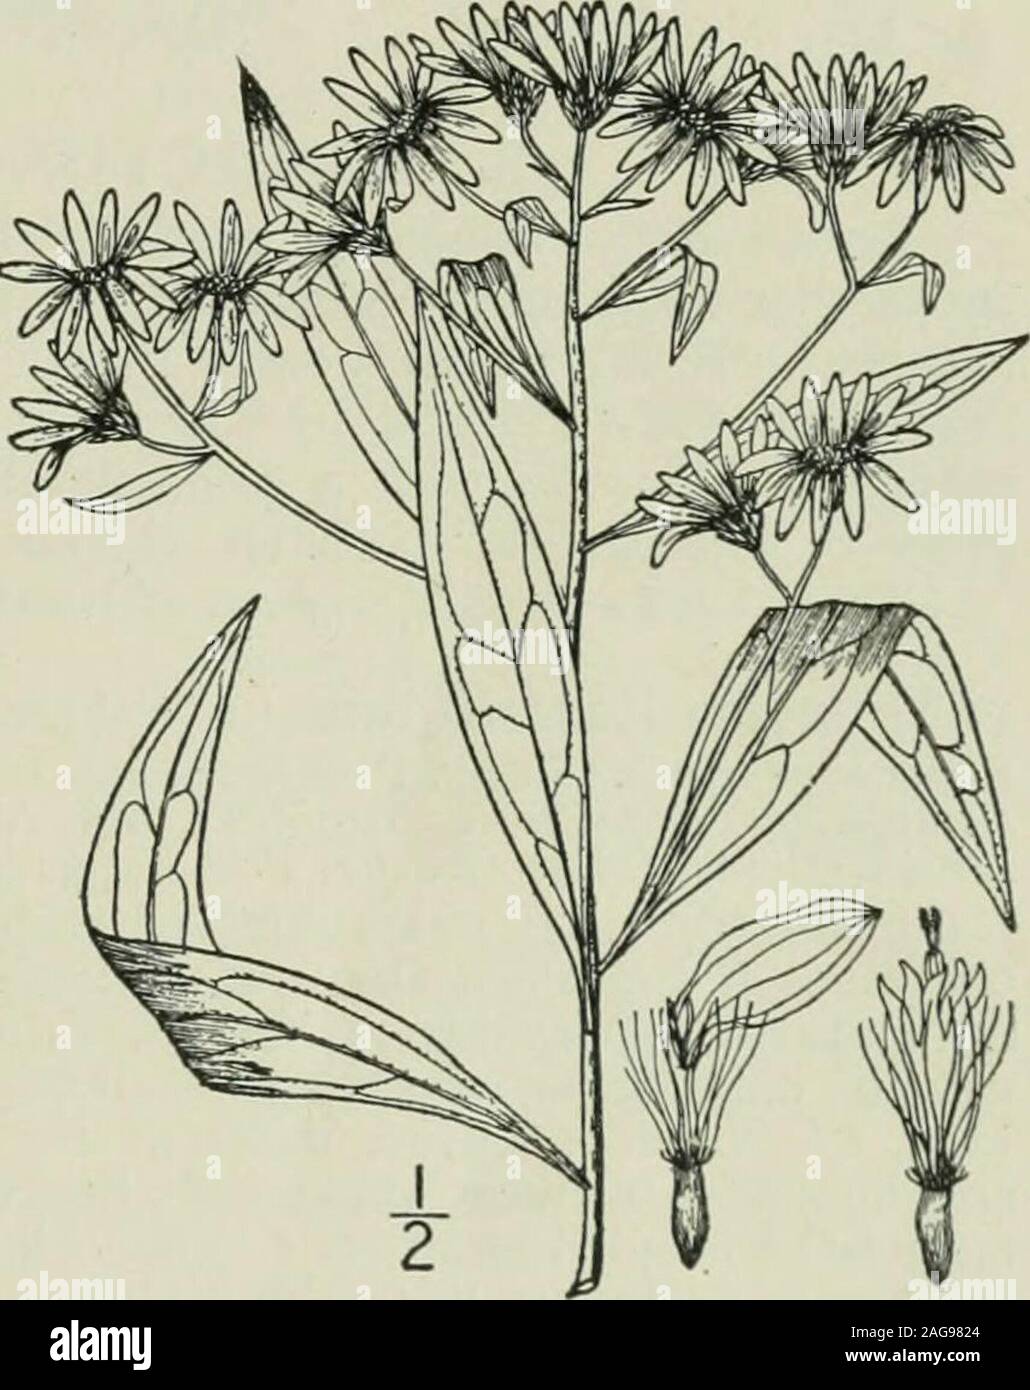 . An illustrated flora of the northern United States, Canada and the British possessions : from Newfoundland to the parallel of the southern boundary of Virginia and from the Atlantic Ocean westward to the 102nd meridian. 22.Diplopappus umbellatus Hook. Fl. Bor. Am. 2 : 22.D. umbellata Nees, Gen. & Sp. Ast. 178. 1832.Aster umbellatus var. piibens A. Gray, Syn. Fl. i 2, 197. 1884.D. pubens Rydb. Bull. Torr. Club 37: 147. 1910. Stem glabrous or pubescent above, striate, corym-bosely branched at the summit, i°-8° high. Leaveslanceolate to oblong-lanceolate, ascending, glabrousabove, usually pubes Stock Photo